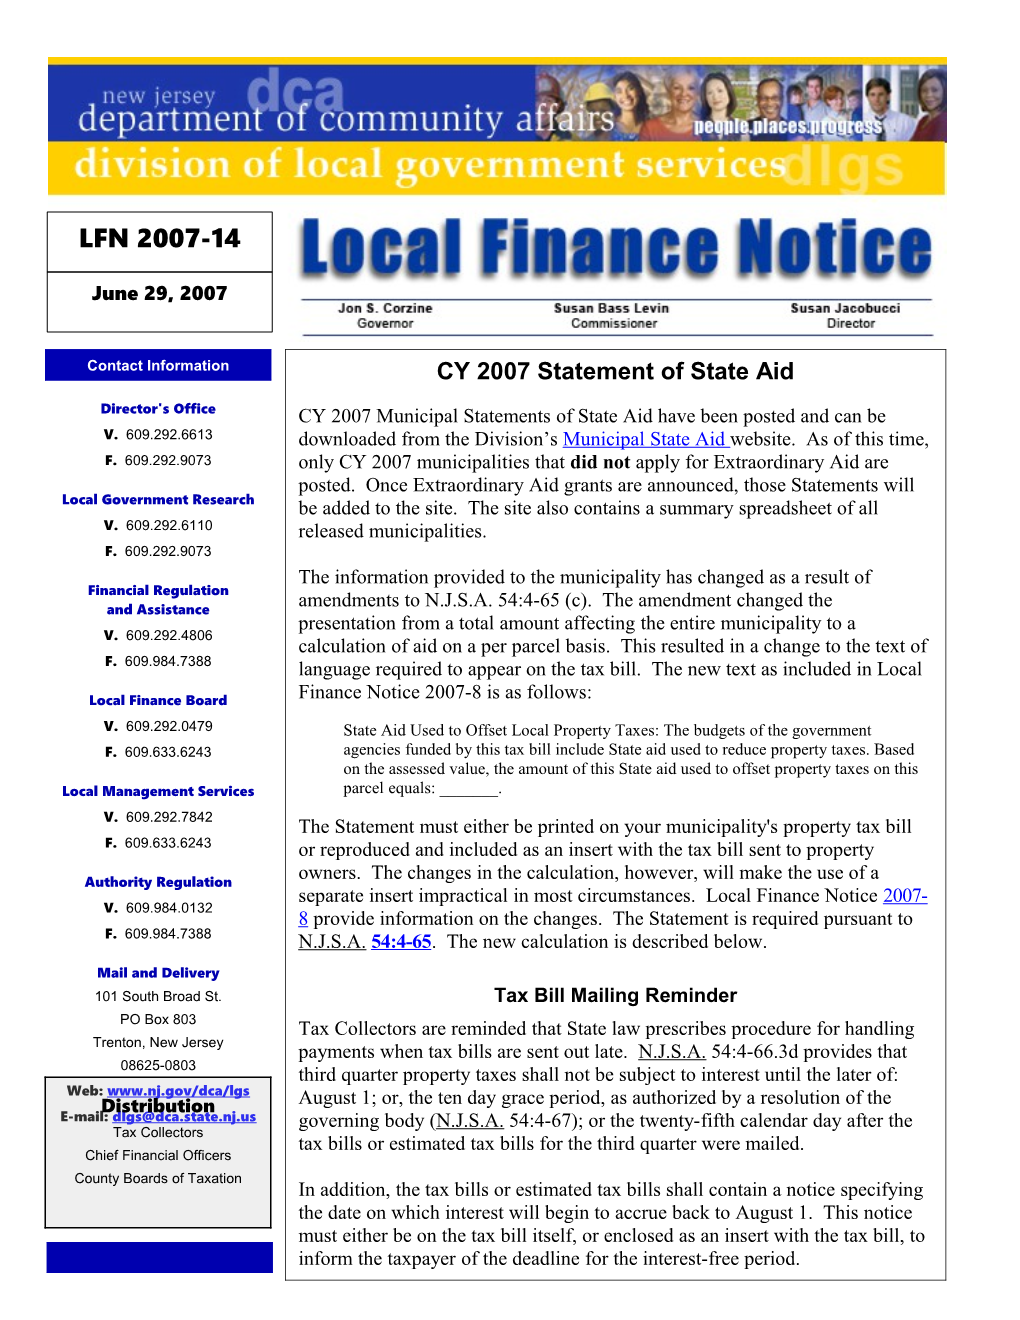 Local Finance Notice 2005-17July 11, 2005Page 1